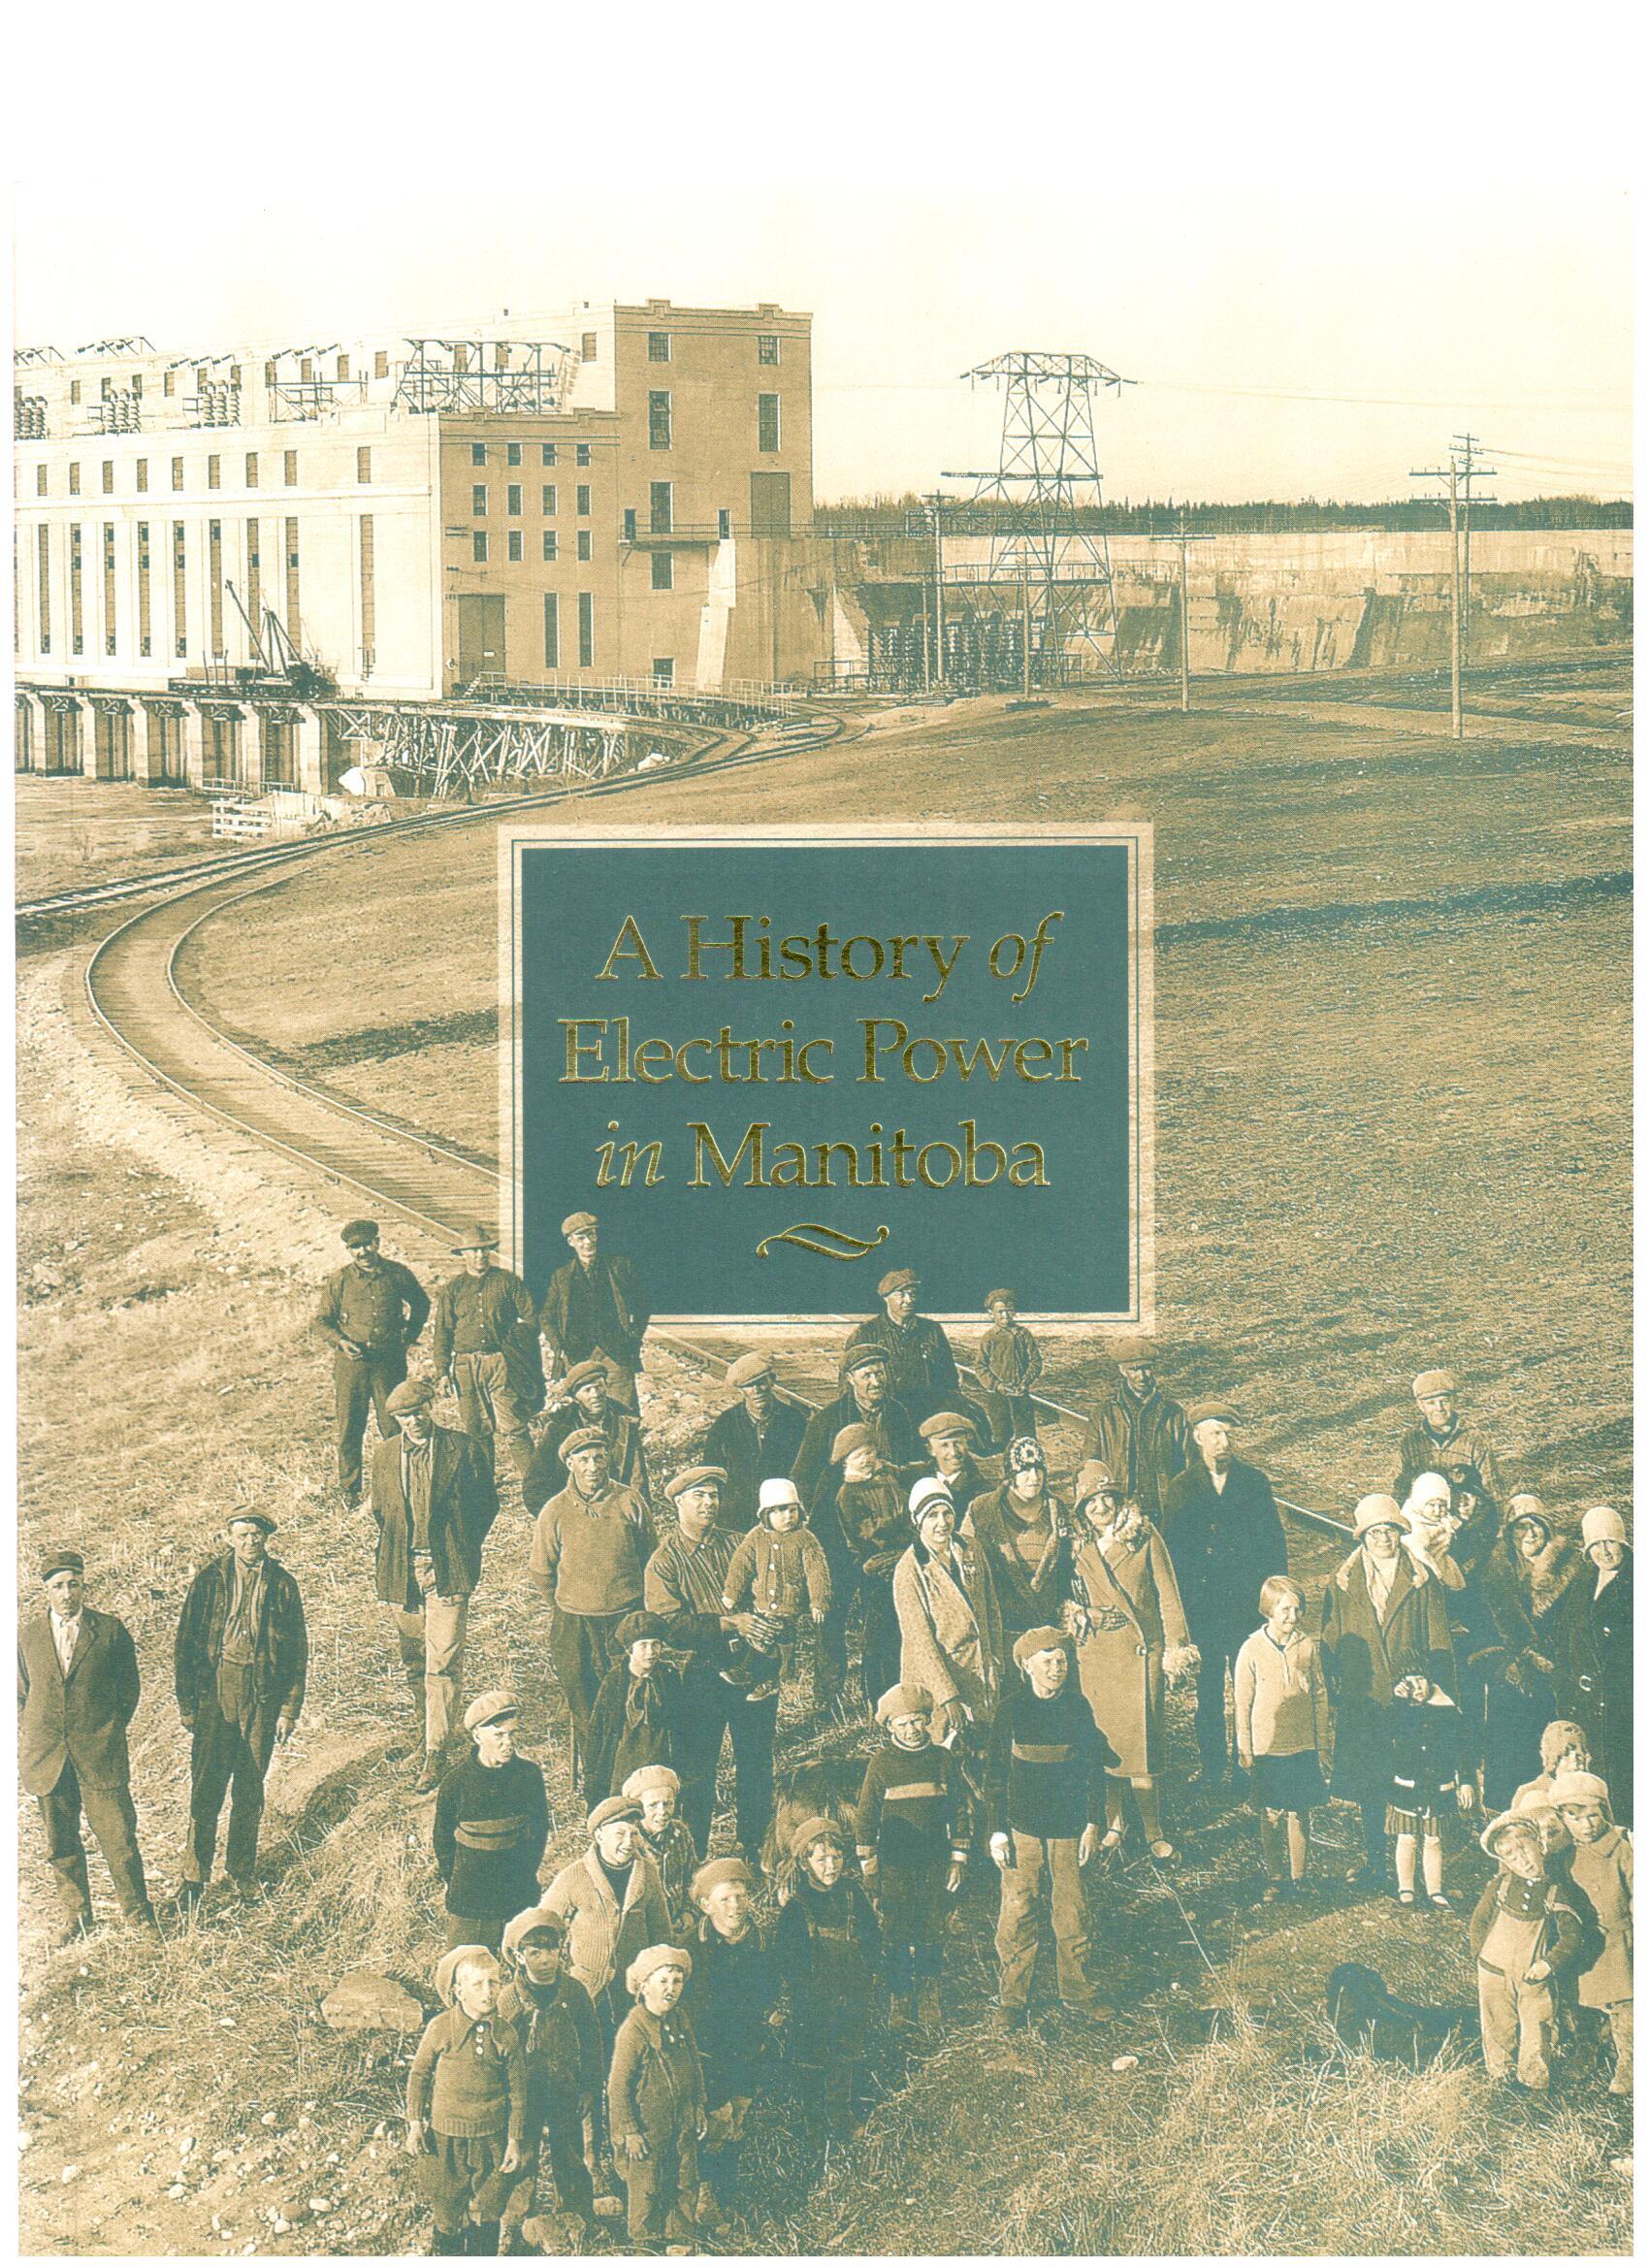 A history of electric power in Manitoba.